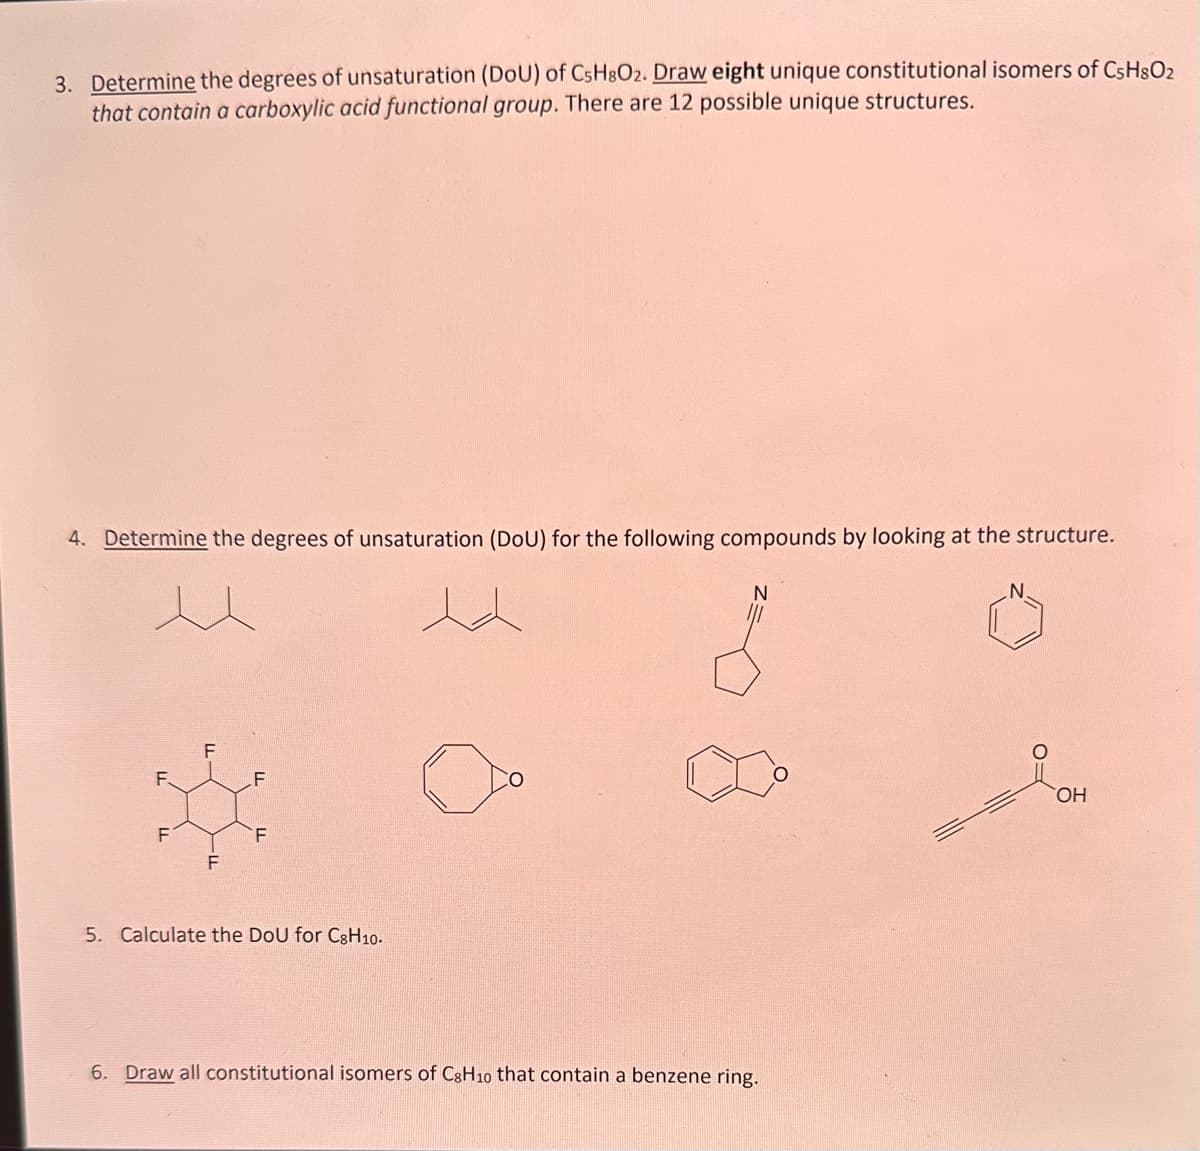 3. Determine the degrees of unsaturation (DoU) of C5H8O2. Draw eight unique constitutional isomers of C5H8O₂
that contain a carboxylic acid functional group. There are 12 possible unique structures.
4. Determine the degrees of unsaturation (DoU) for the following compounds by looking at the structure.
F.
F
F
F
F
5. Calculate the DoU for C8H10.
N
6. Draw all constitutional isomers of C8H10 that contain a benzene ring.
OH